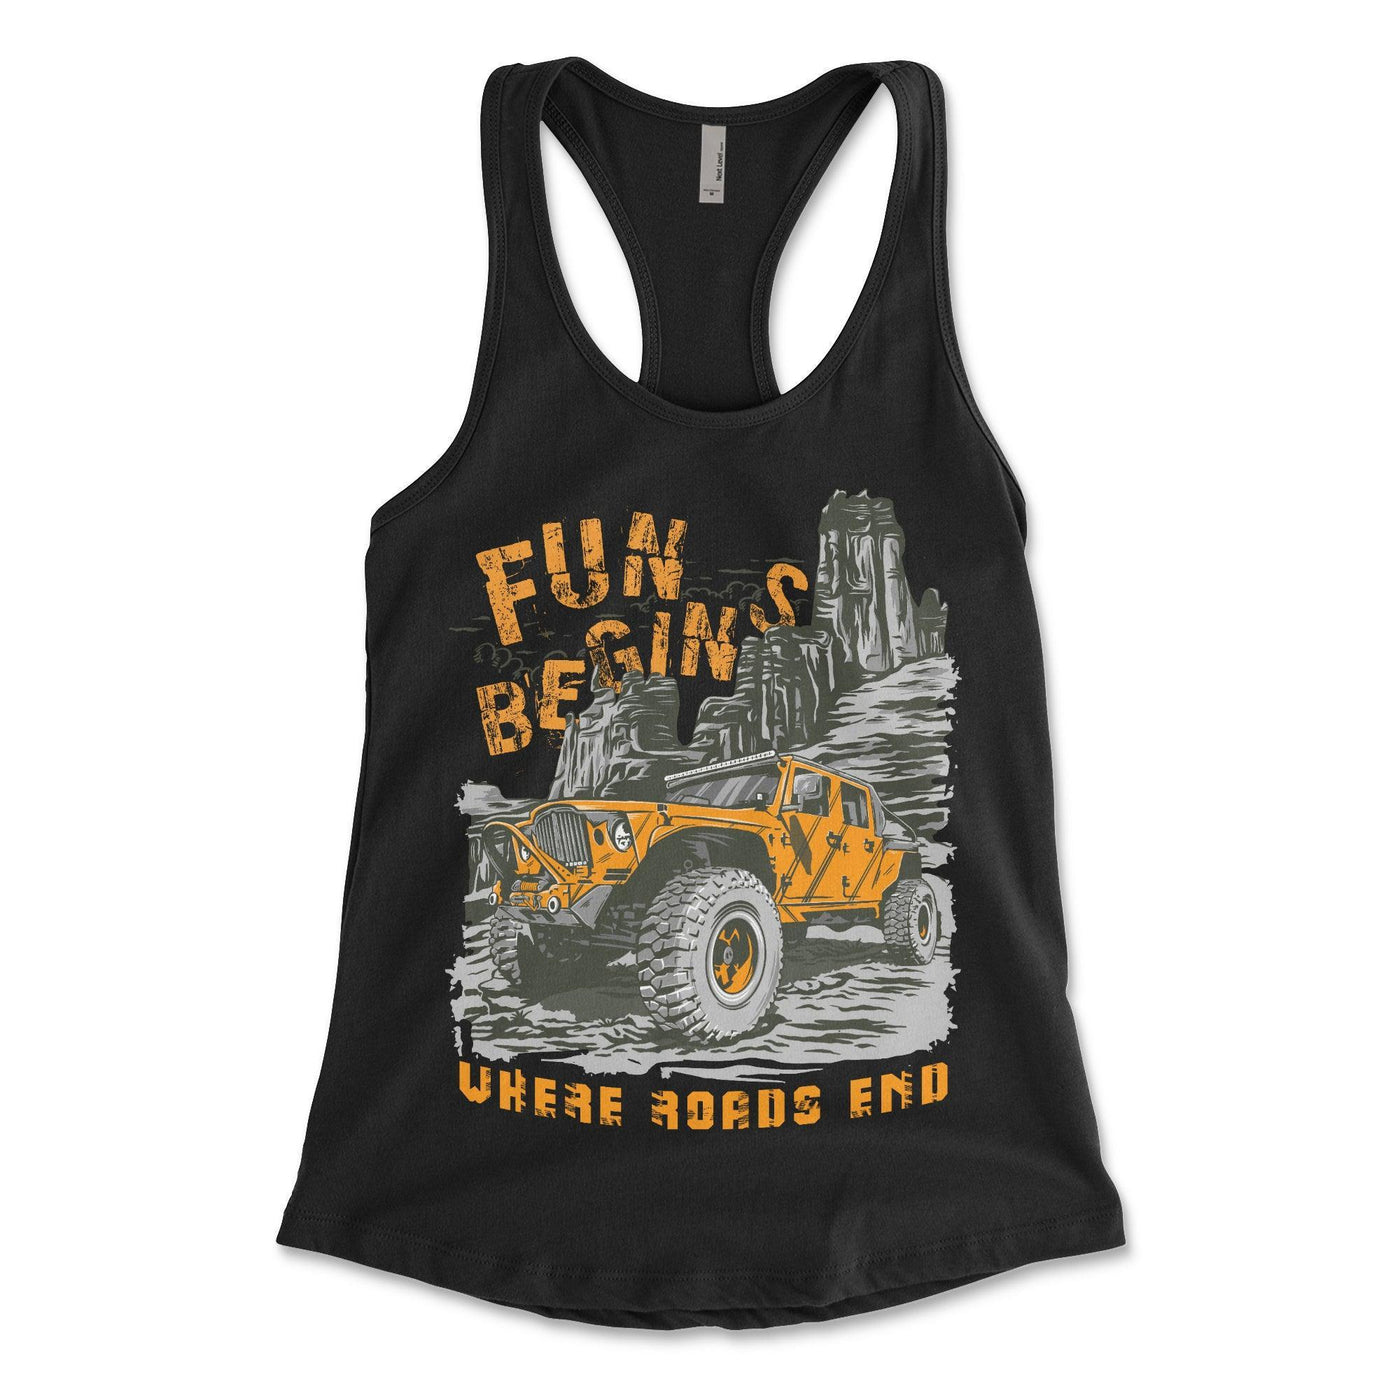 Fun Begins Where the Road Ends Ladies Racerback Tank - Goats Trail